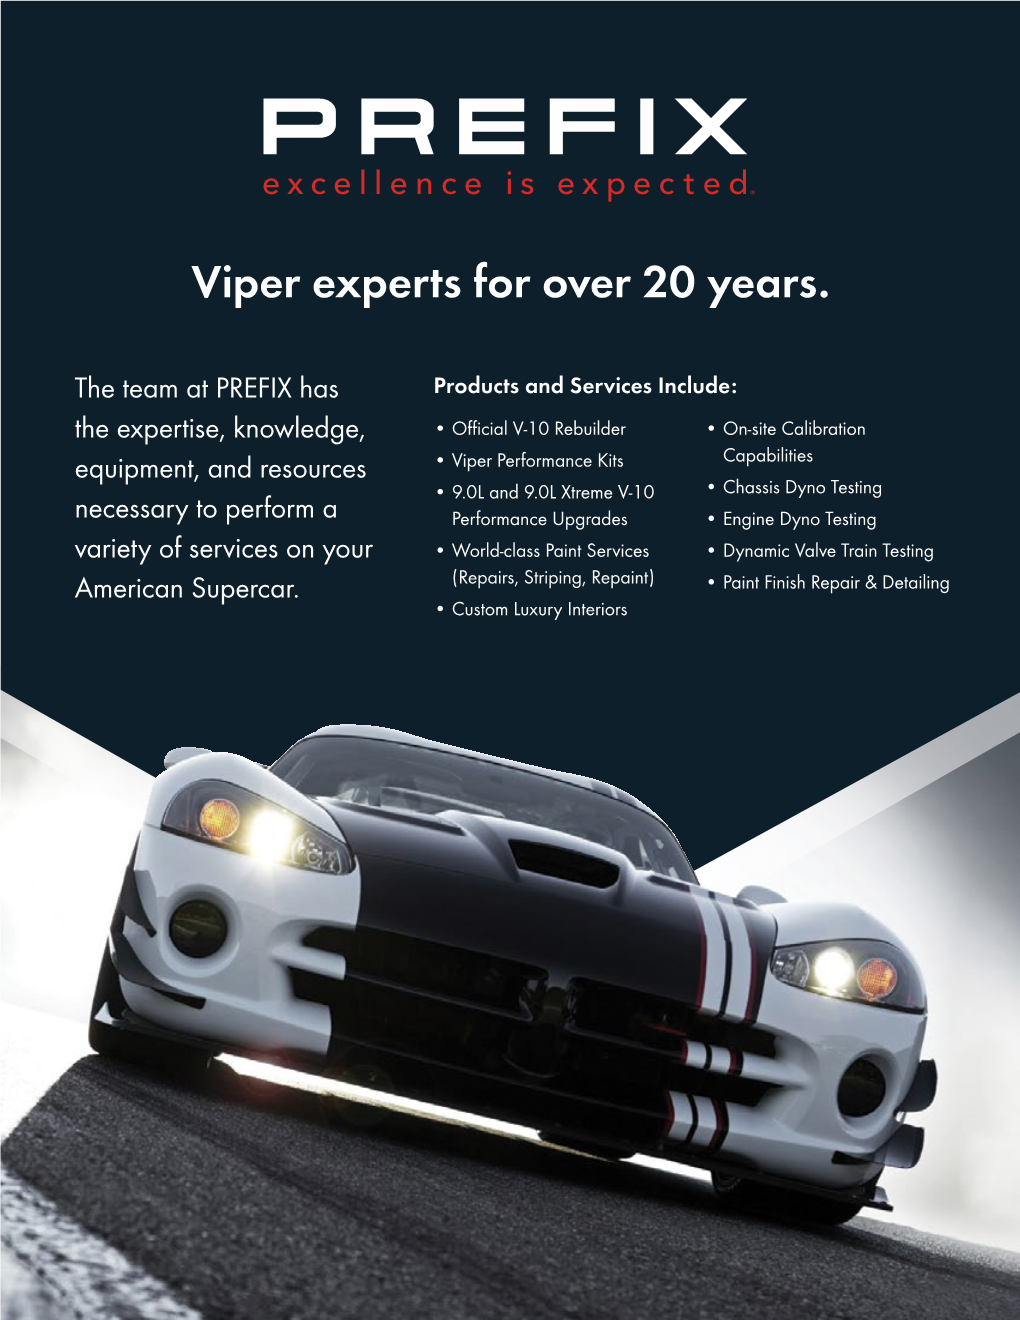 Viper Experts for Over 20 Years